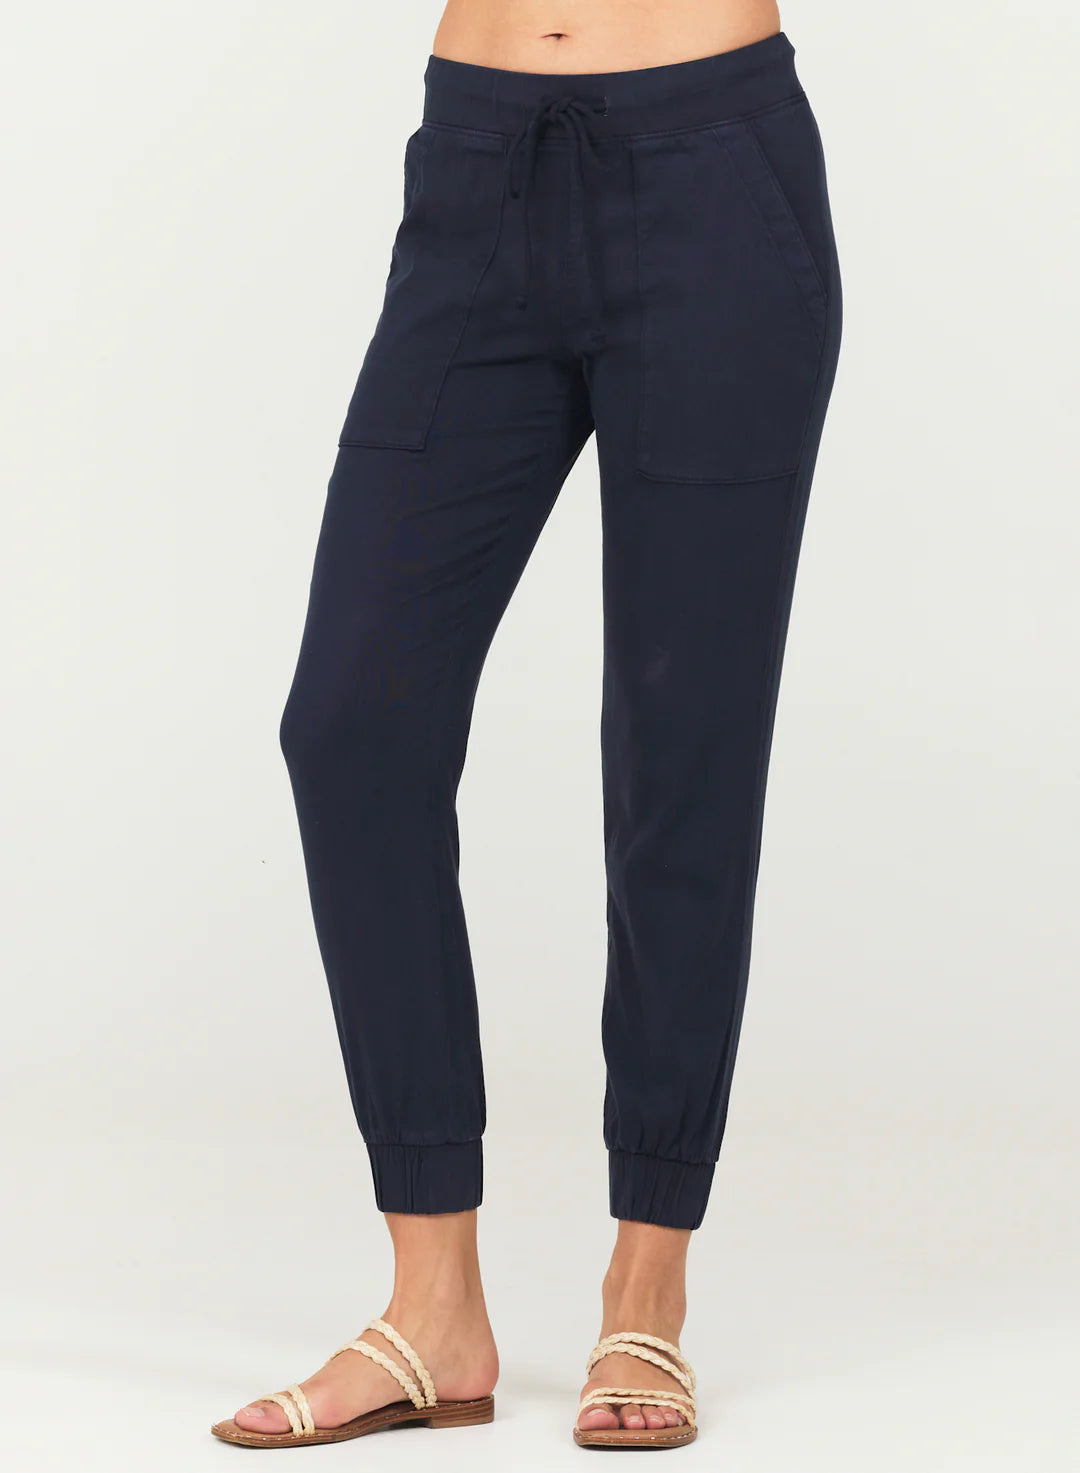 Navy jogger pants with pockets and elasticated cuffs